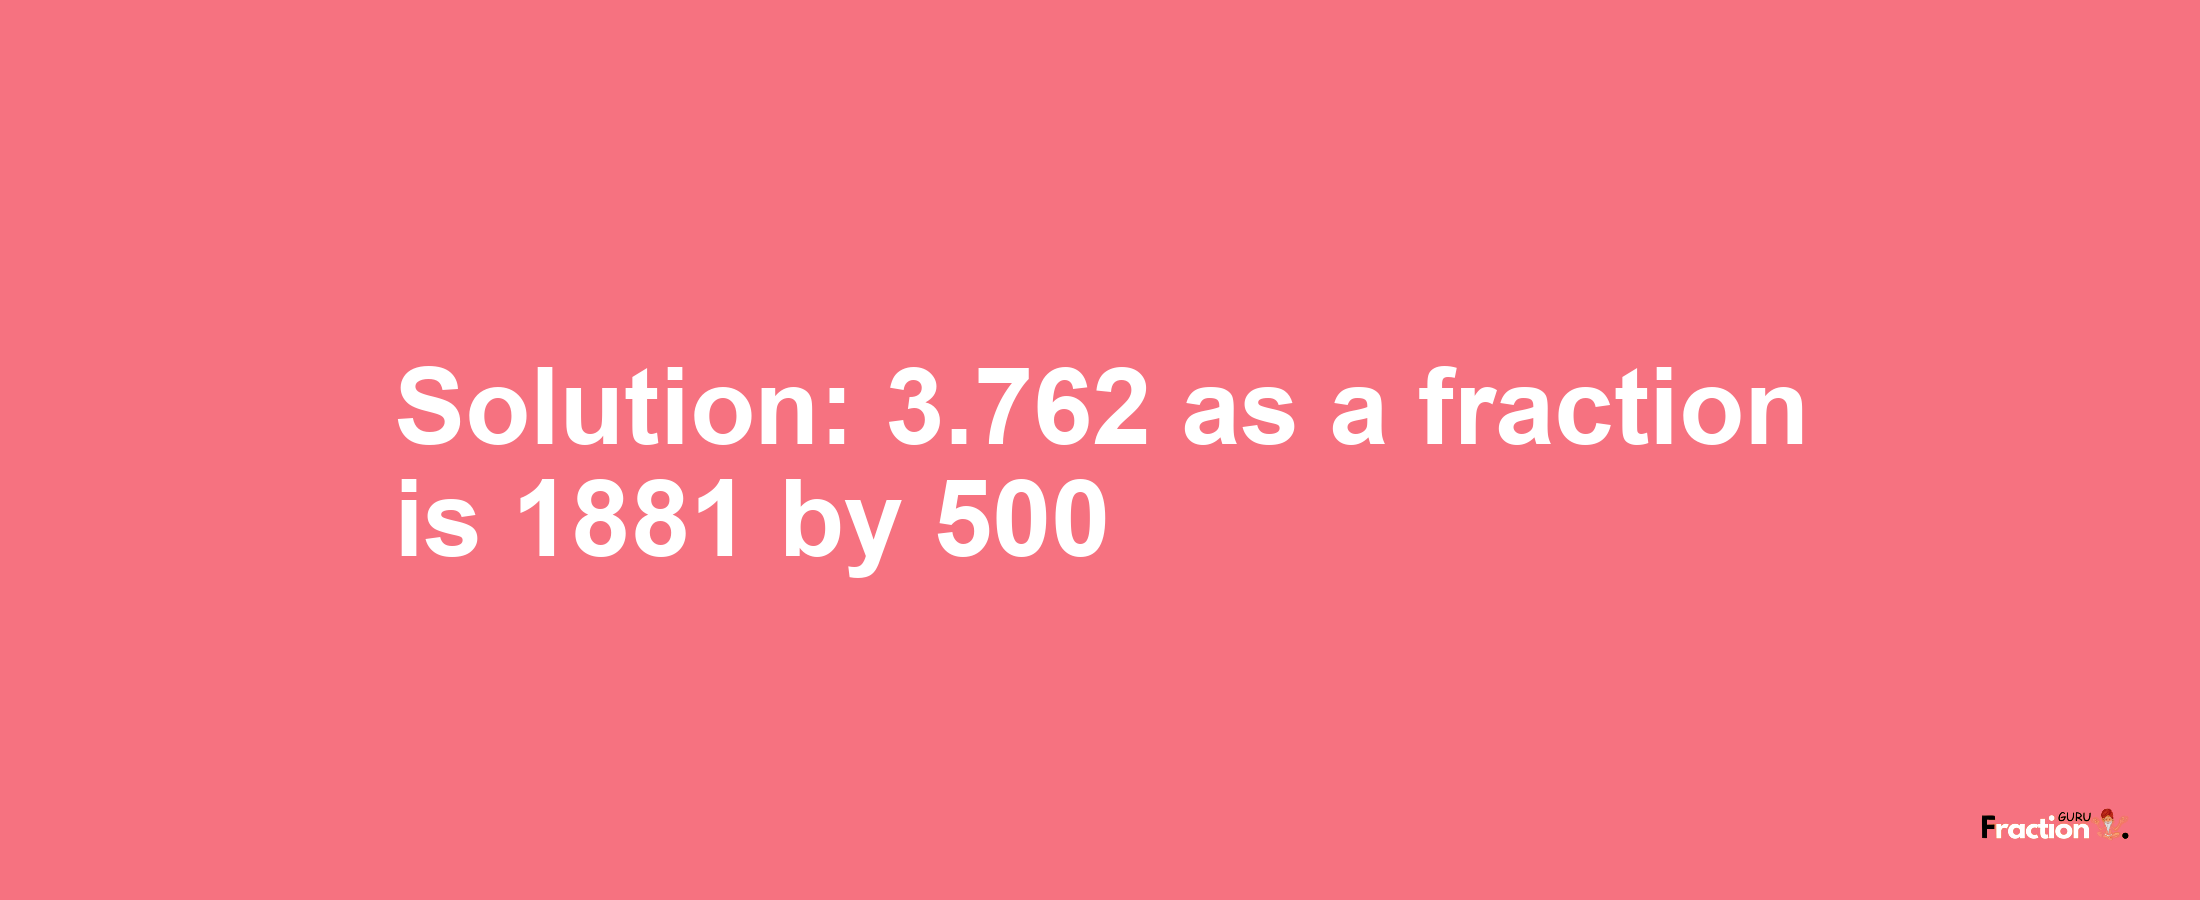 Solution:3.762 as a fraction is 1881/500